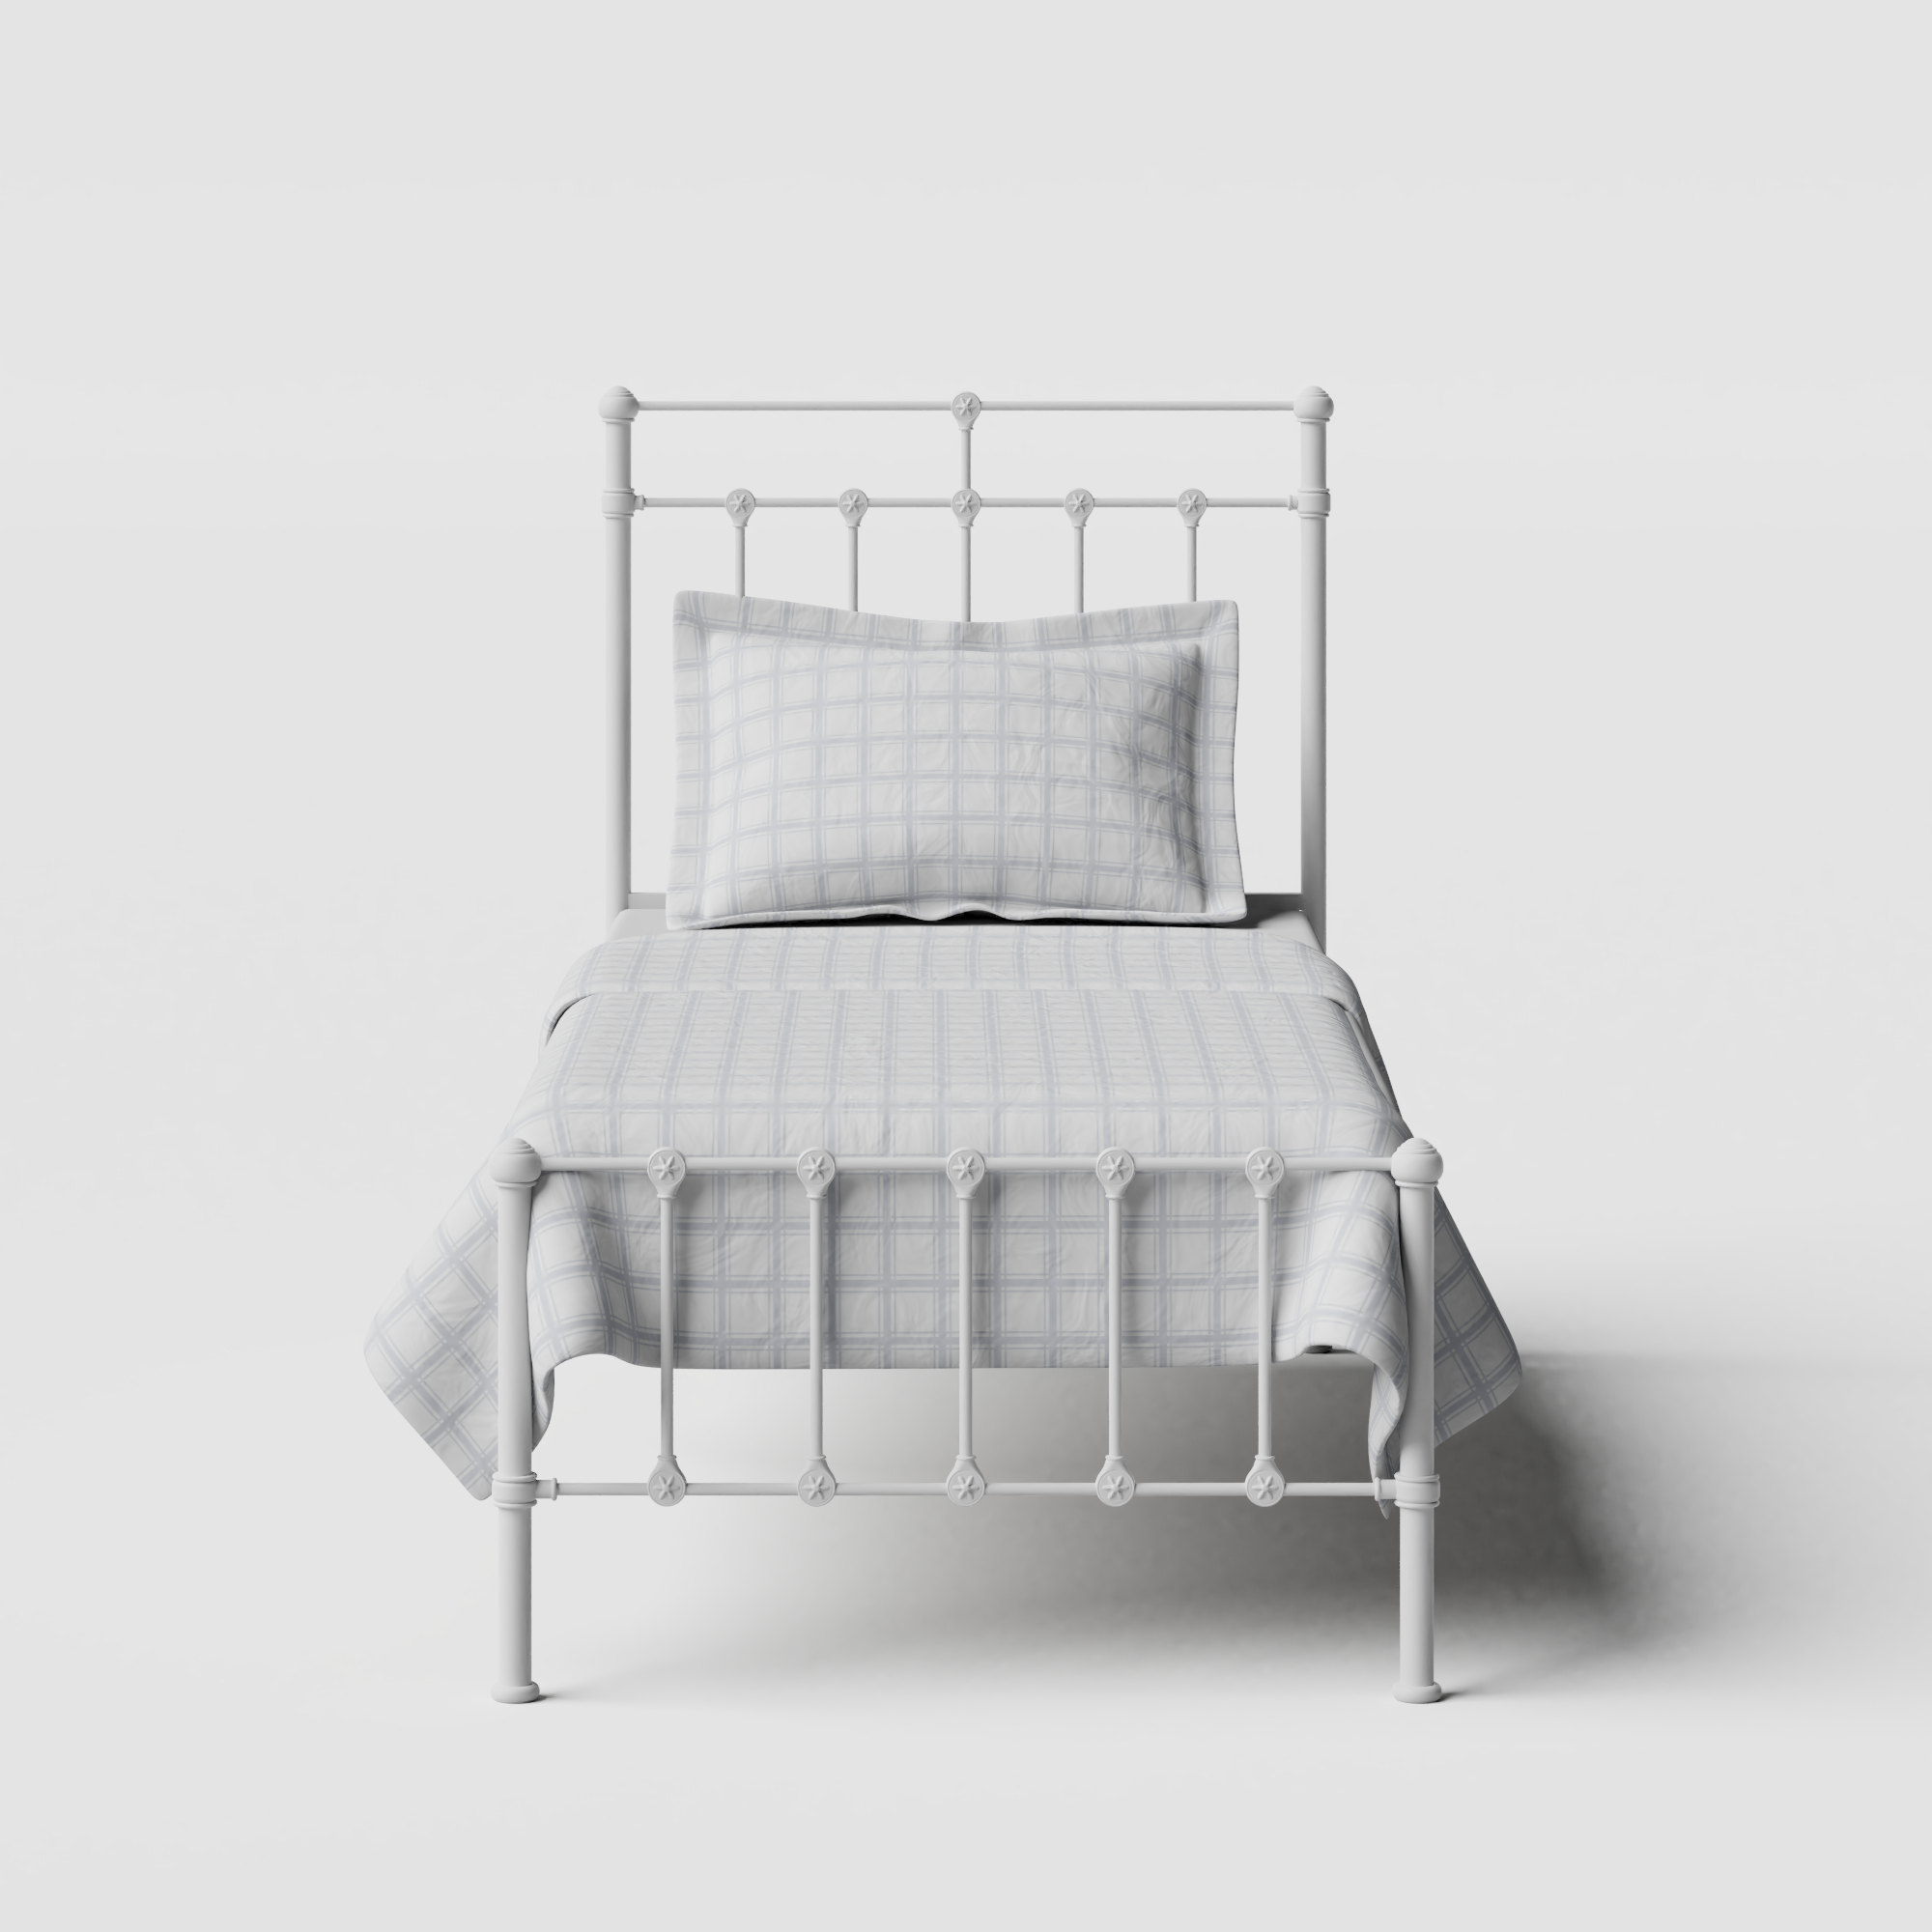 Ashley iron/metal single bed in white